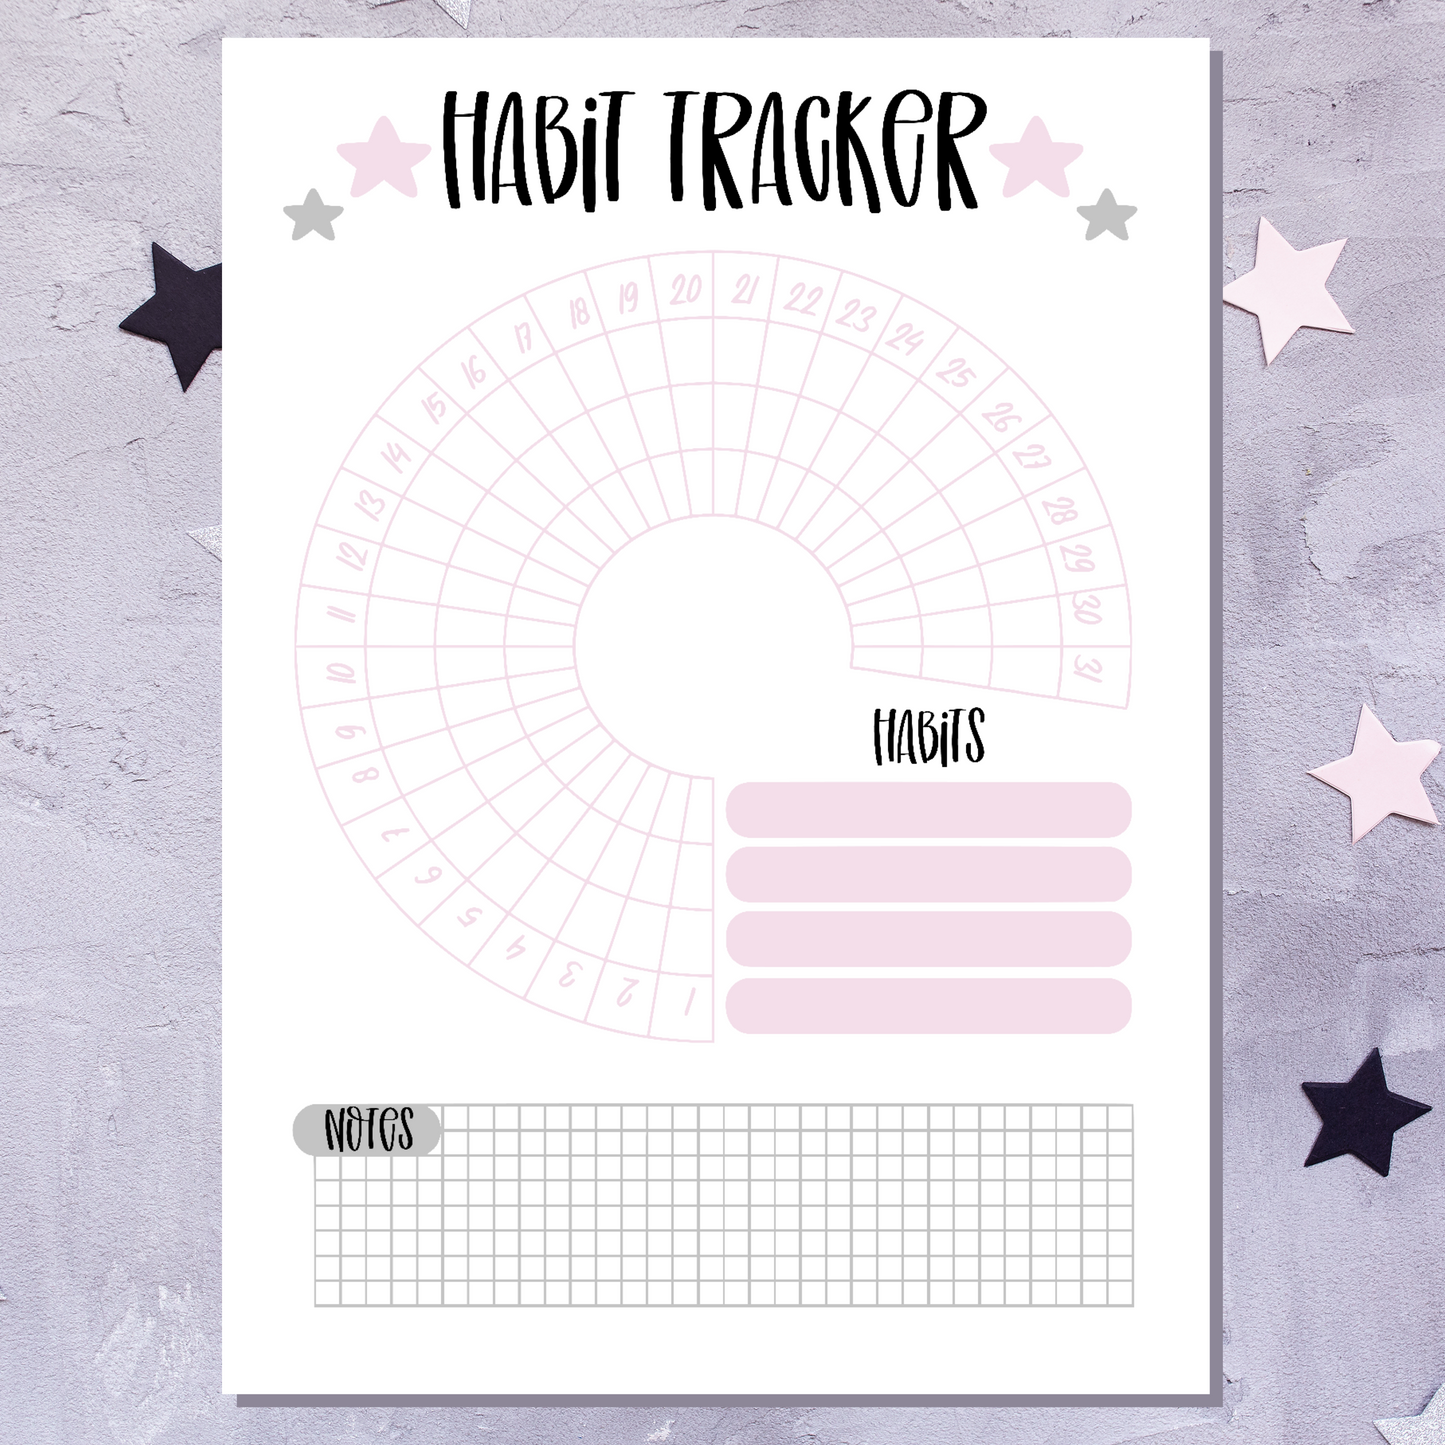 Habit Tracker - full page planner sticker for planner note pages and bullet journals